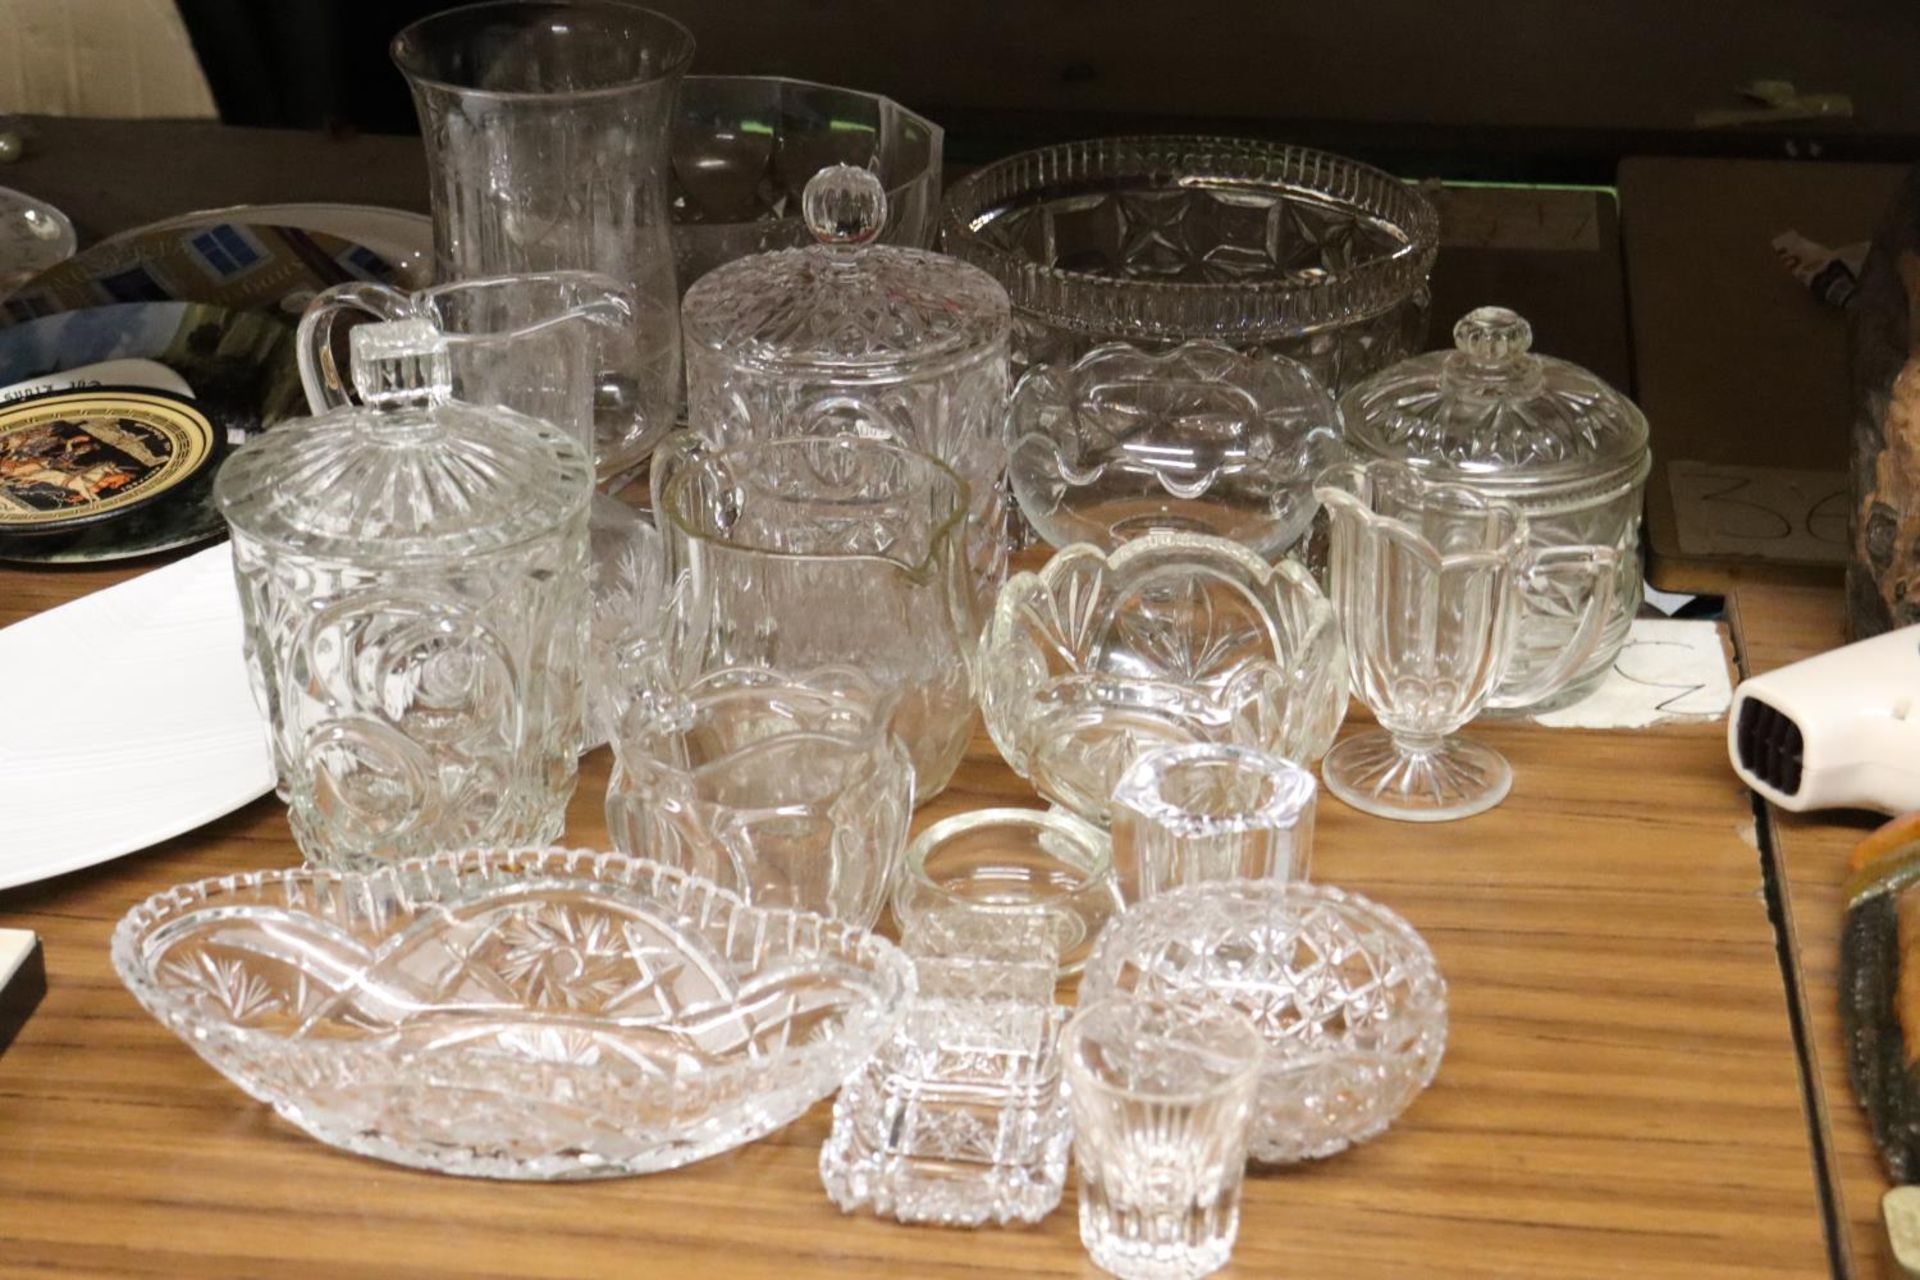 A LARGE QUANTITY OF GLASSWARE TO INCLUDE BOWLS, JUGS, LIDDED CONTAINERS, ETC